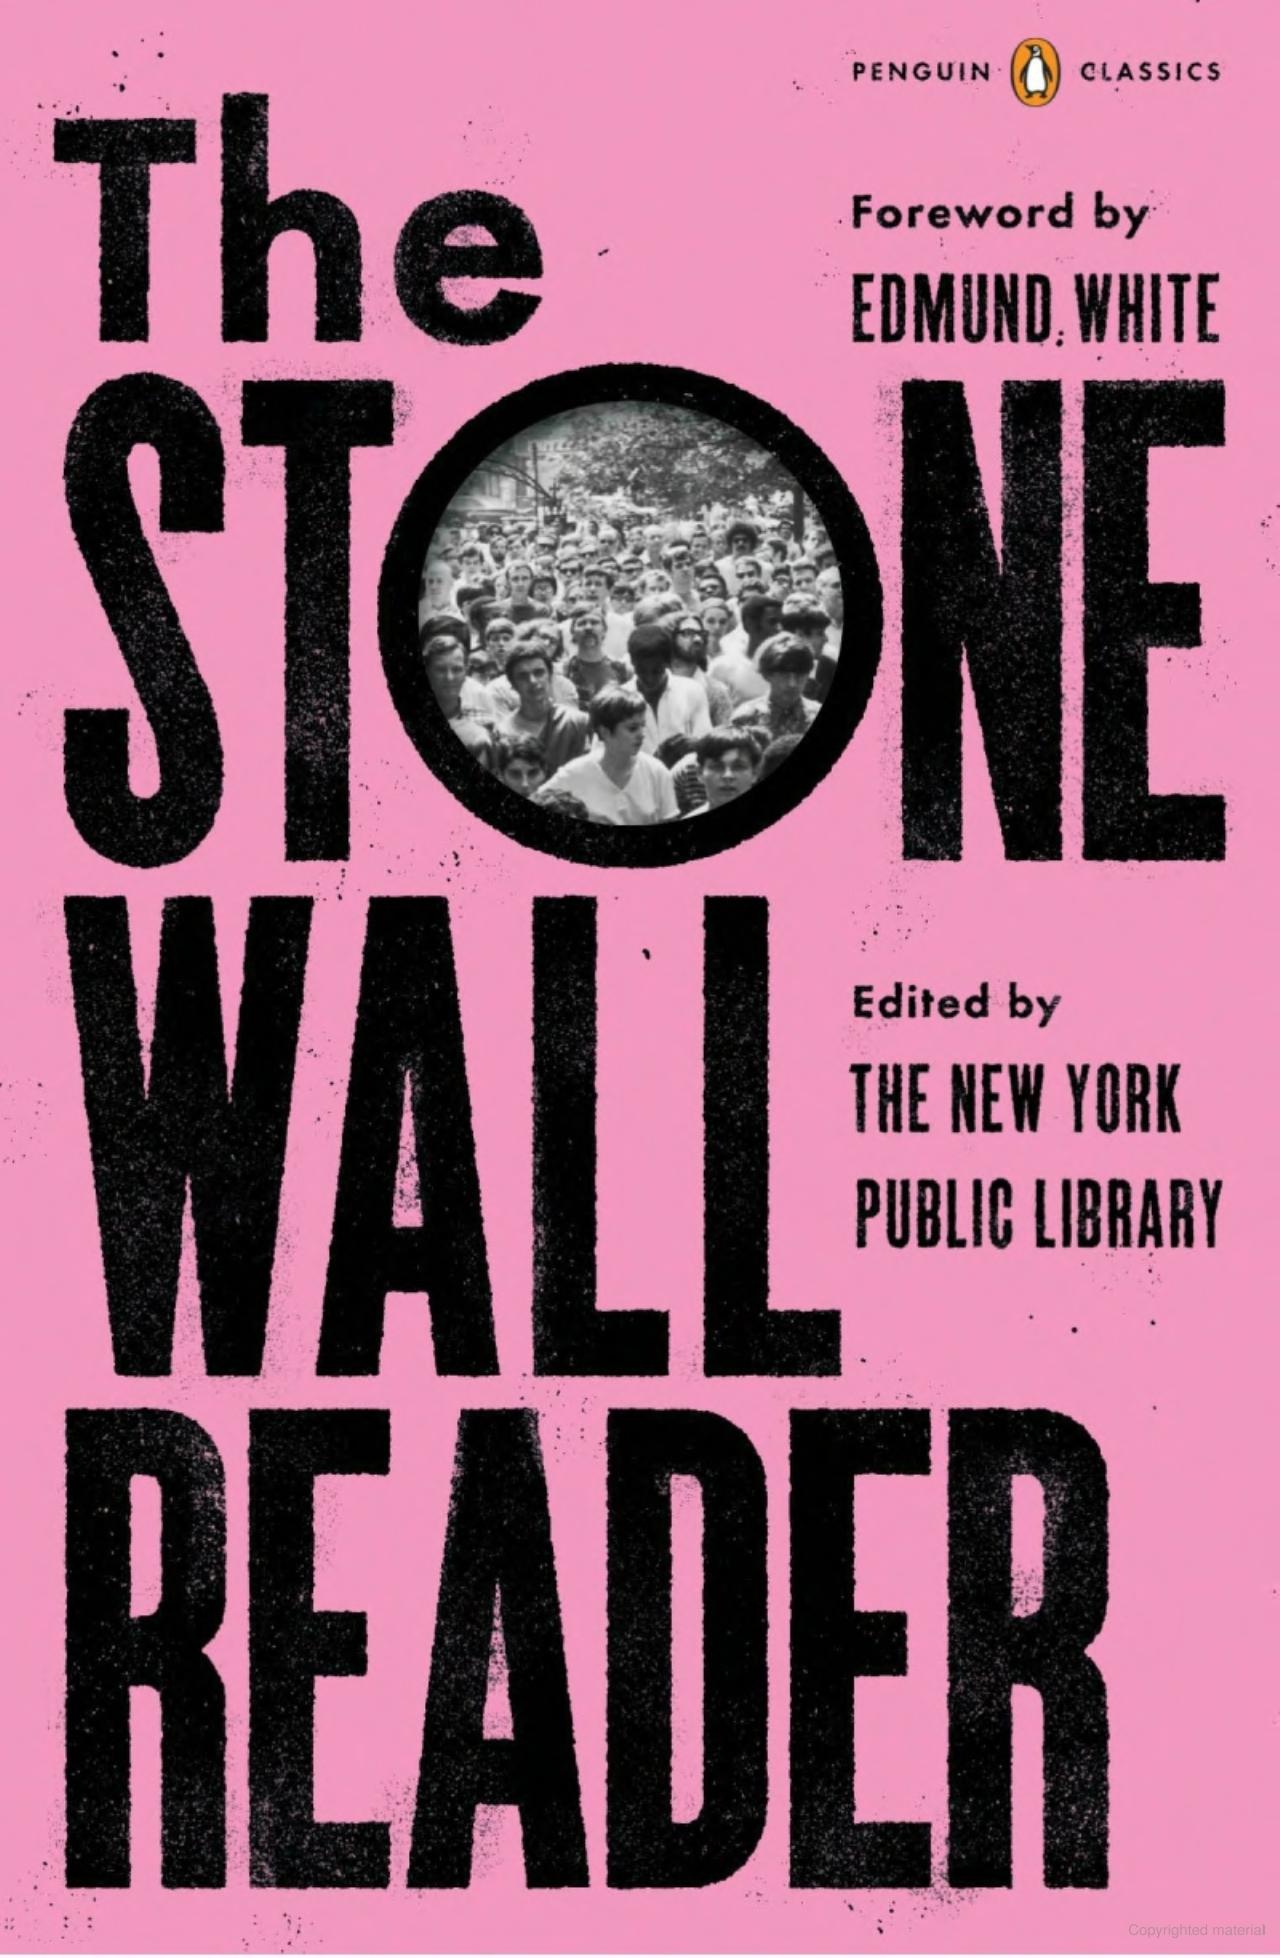 Cover of The Stonewall Reader. It is pink with black text. The O in Stonewall features a black and white photo of a crowd of people. 